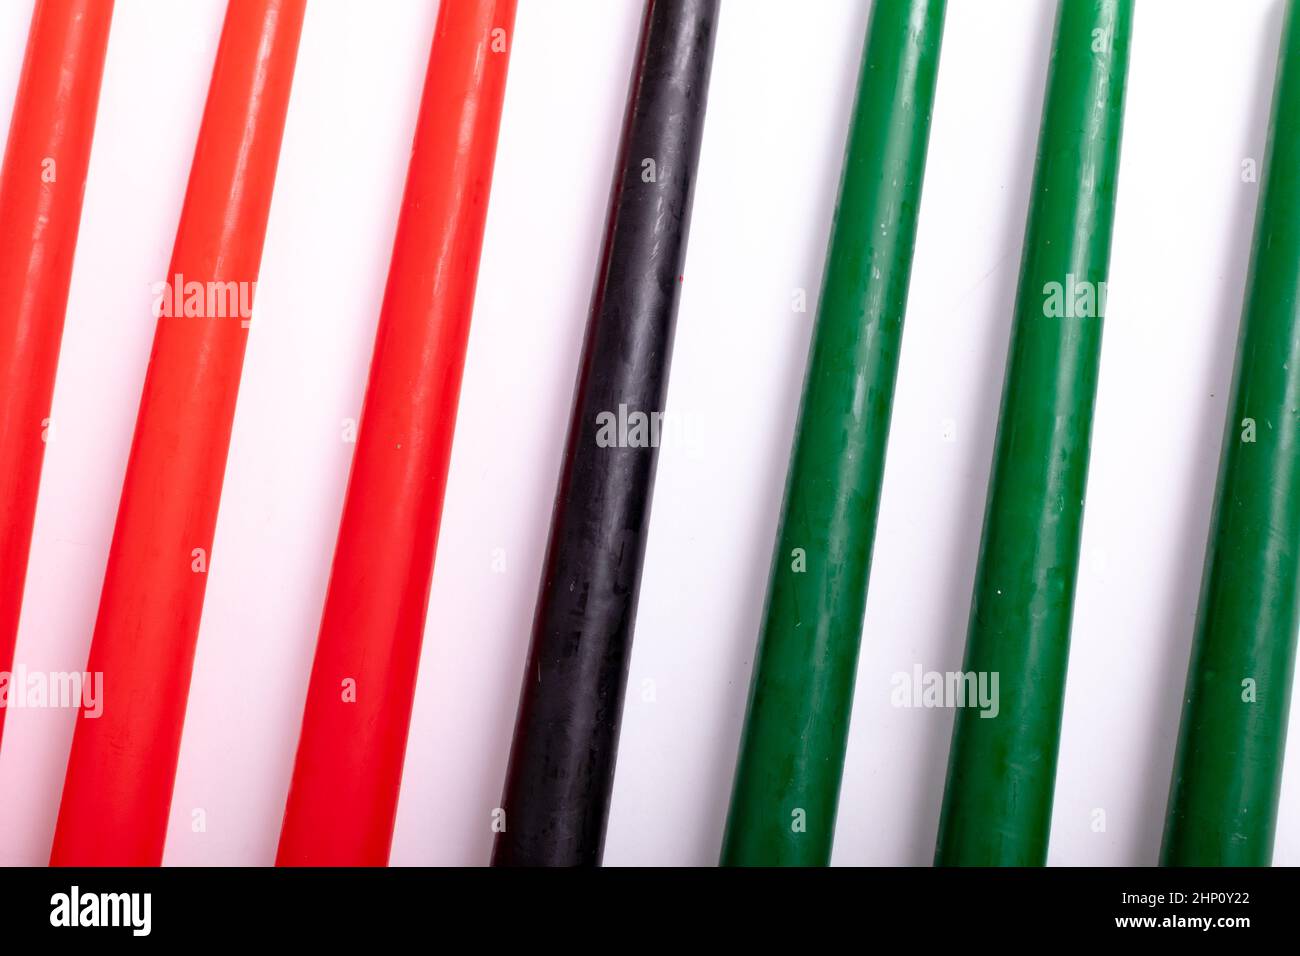 Composition of halloween candles in red black and green on white background Stock Photo